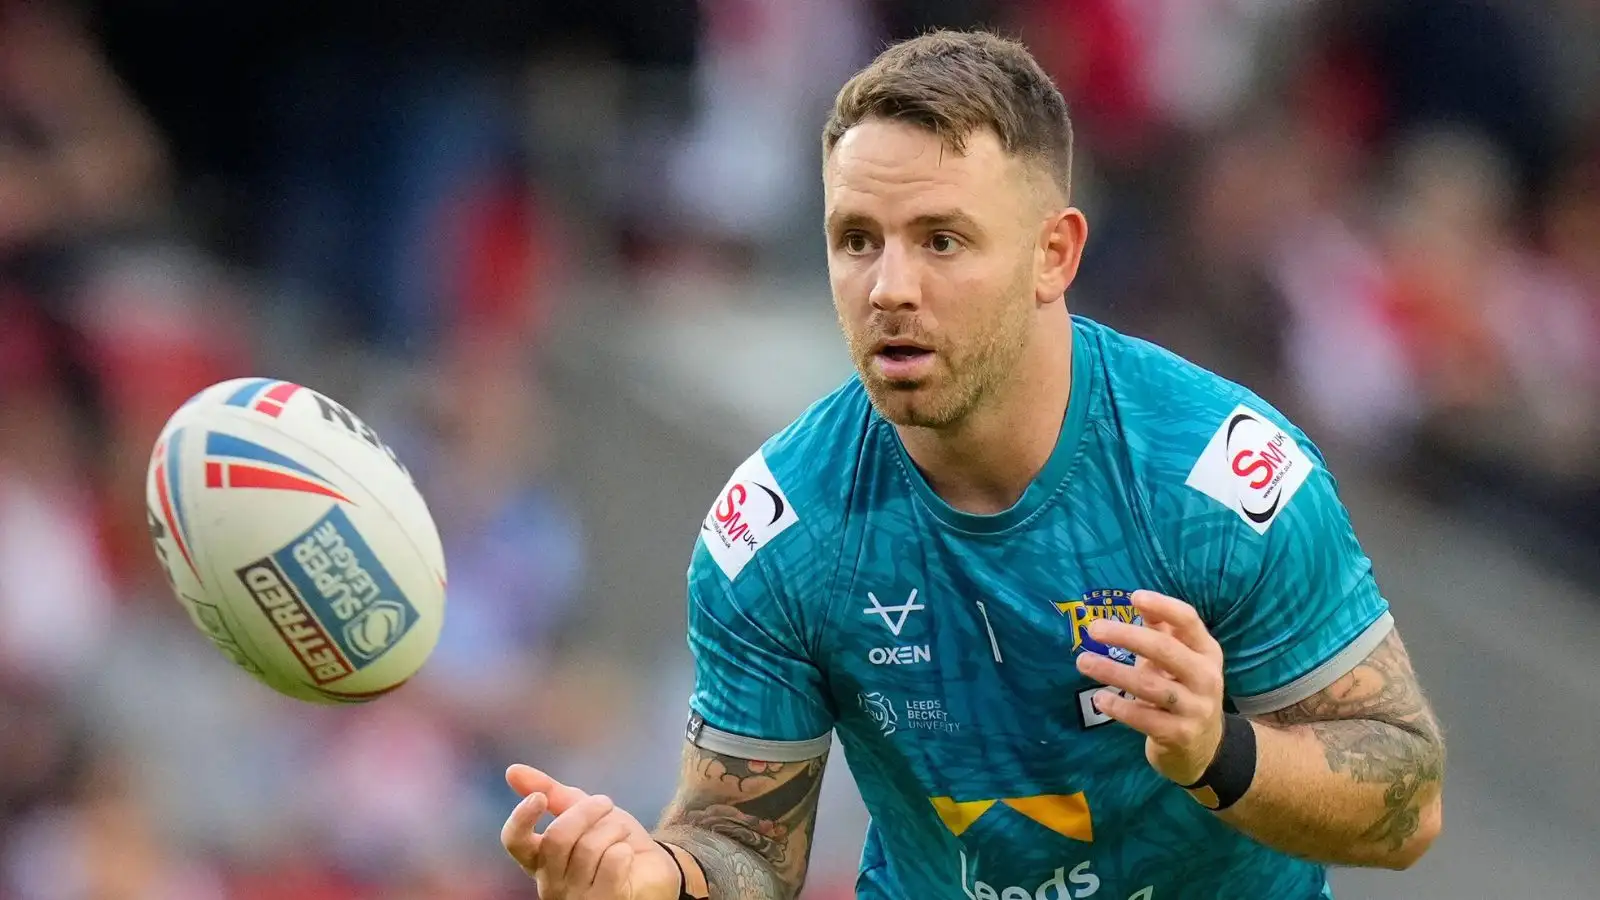 Leeds Rhinos stalwart Richie Myler departs in surprise Championship move: ‘The time felt right for a new challenge’